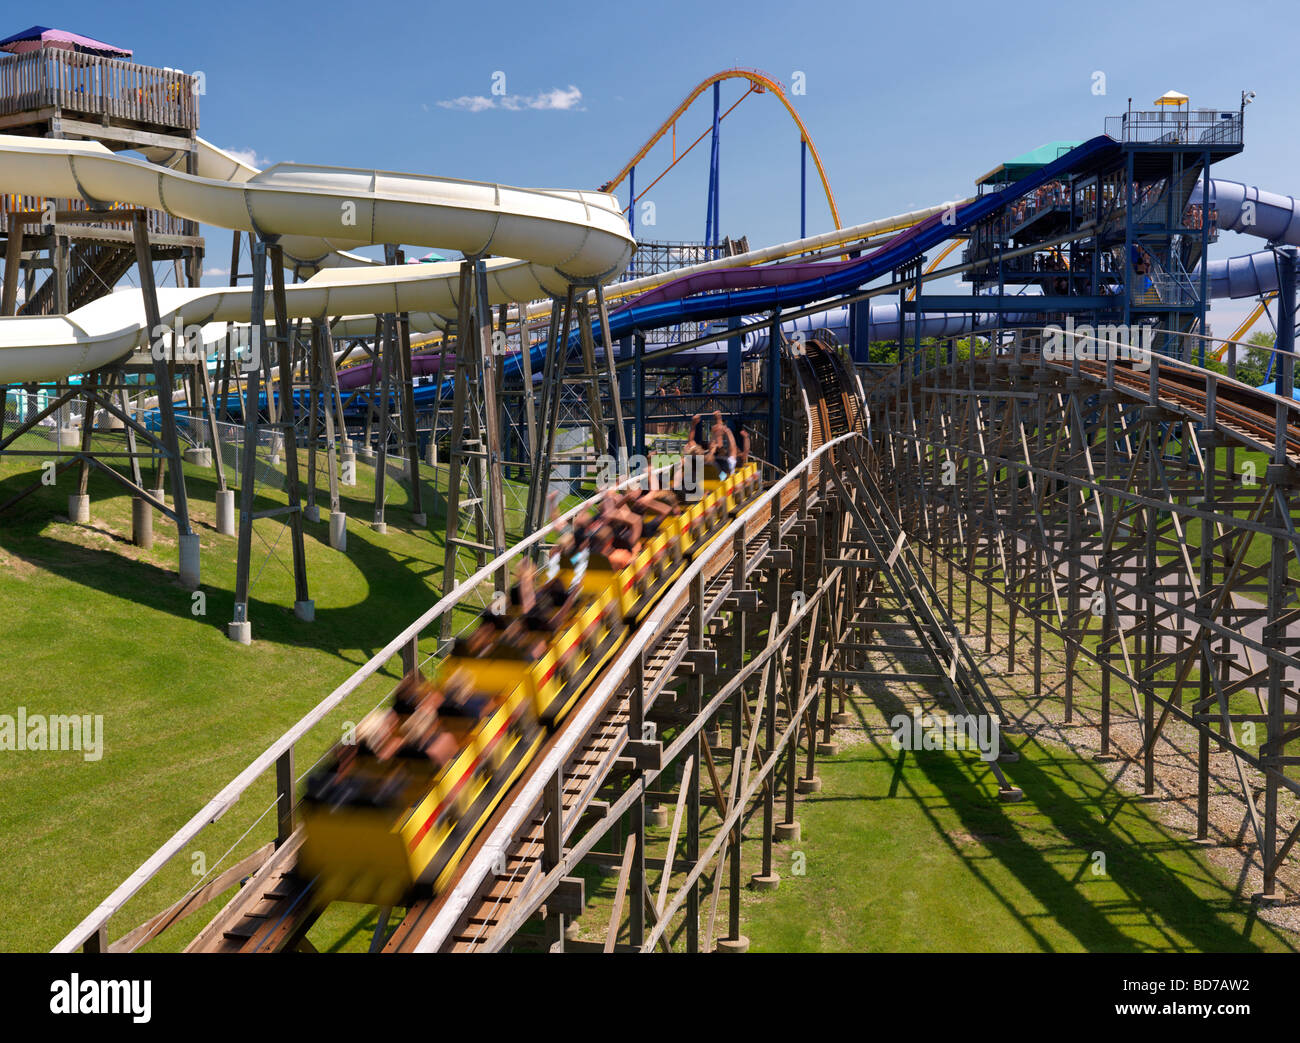 People on wooden roller coaster Mighty Canadian Minebuster at Canada's Wonderland amusement park Stock Photo